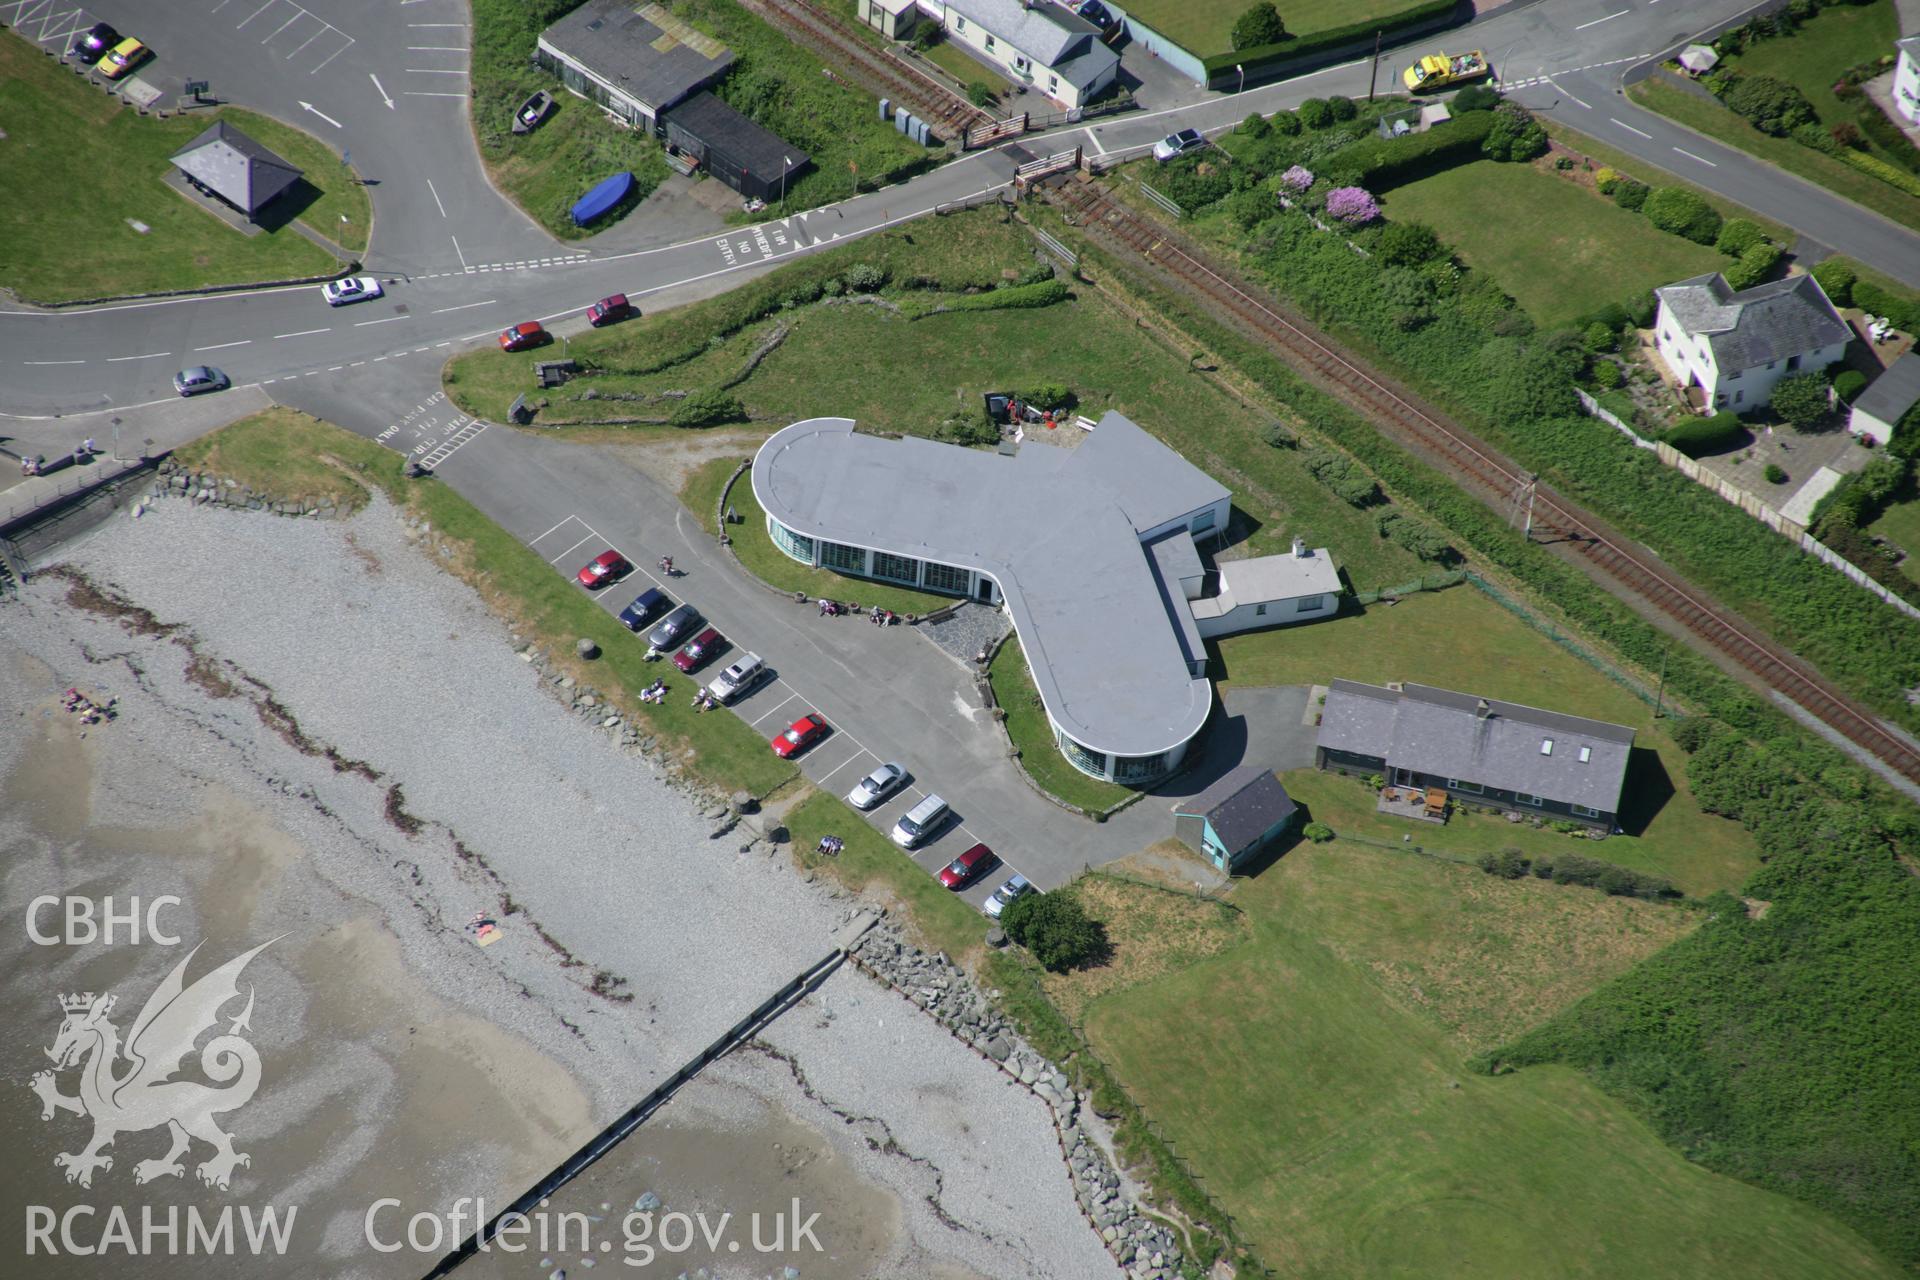 RCAHMW colour oblique aerial photograph of Moranedd Cafe in Art Deco Pavilion, Criccieth, viewed from the south-east. Taken on 14 June 2006 by Toby Driver.